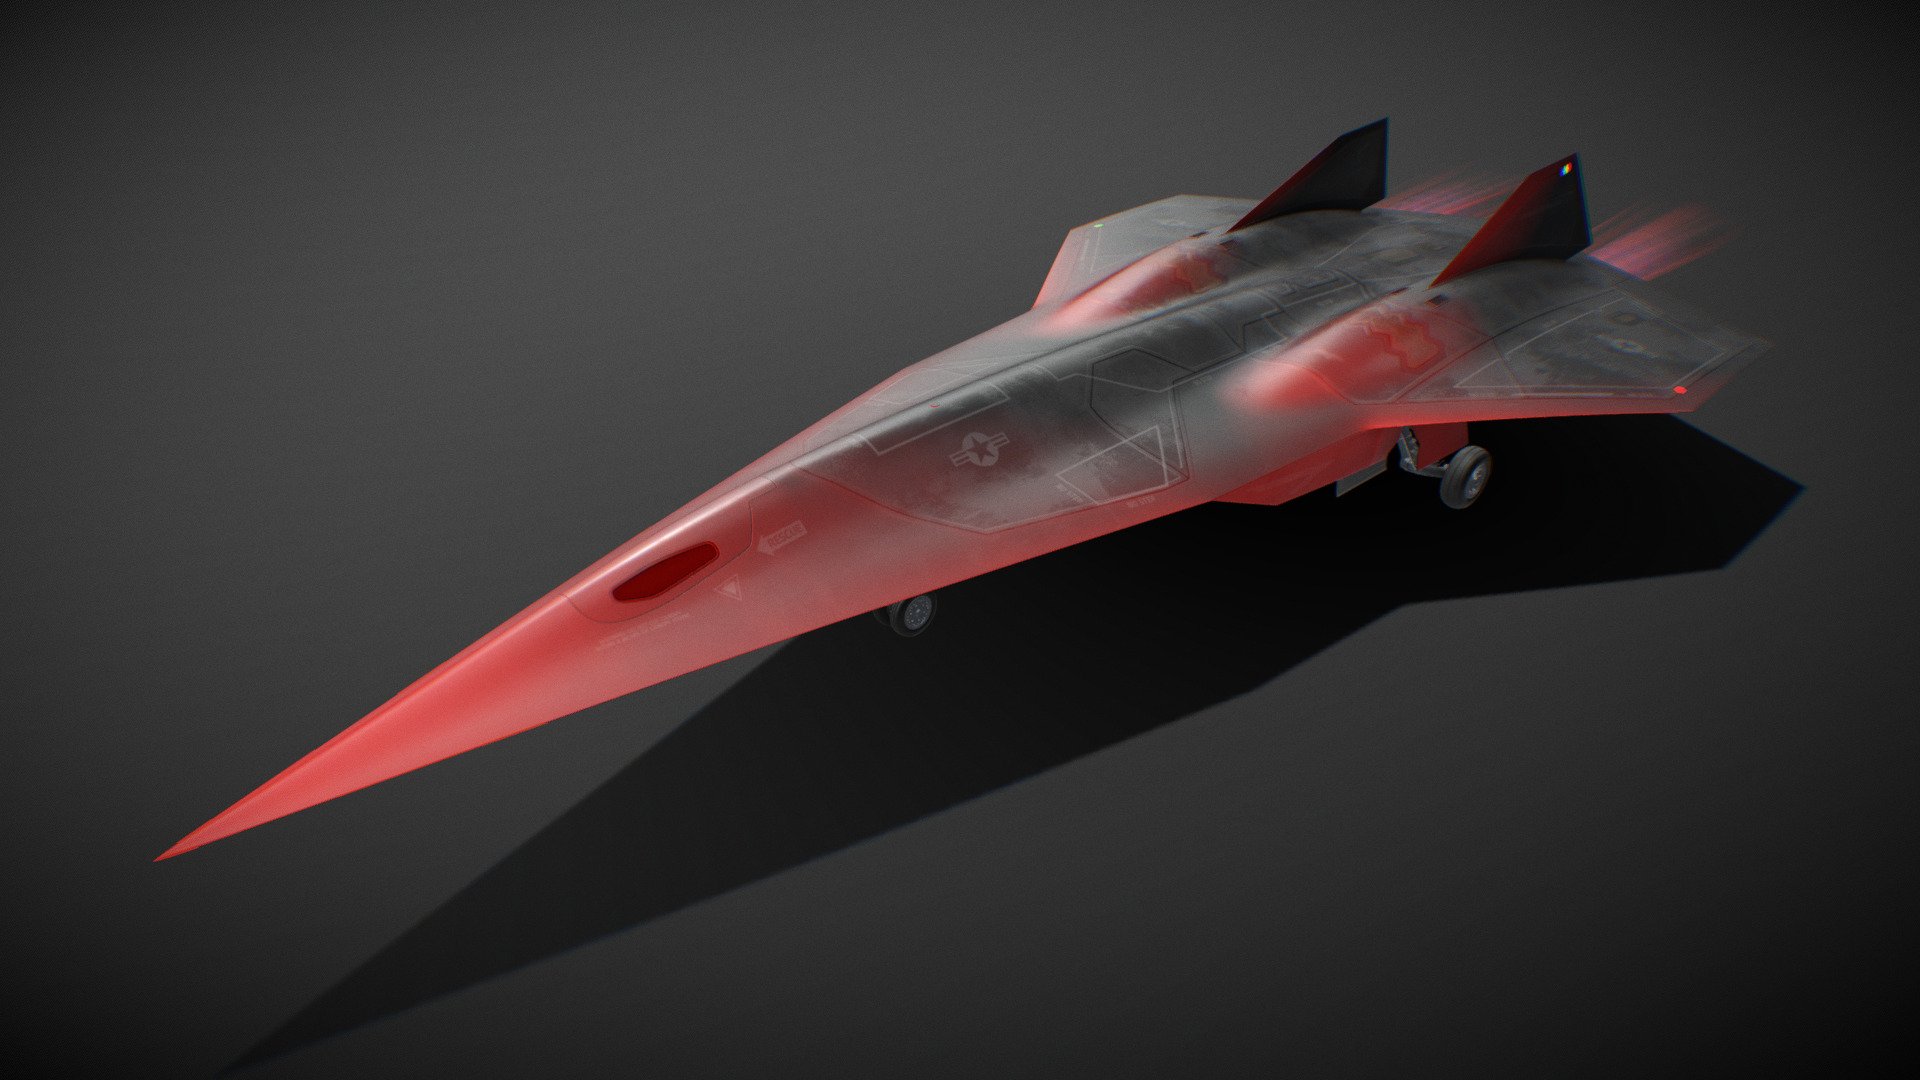 The fictional SR-72 Darkstar Scramjet from Top Gun: Maverick.



[Additional File Includes]

_SPP - Substance Painter project file.

_TEX - 4K textures (For 8K, message me, files are too large).

_C4D_Octane - Cinema 4D project file with Octane shaders.

_C4D - Cinema 4D project file with Physical/Standard shaders.




Landing Gear rigged to extend and retract with a single slider, within the Cinema 4D files only.

_FBX - Autodesk FBX.

_OBJ - OBJ/MTL exported from Cinema 4D. Three versions: subdiv Lv. 0 / 1 / 2.

_E3D - Ready to use in Video Copilot's Element 3D.

_MAX - 3ds Max project file with default shaders, using the PBR textures. May need adjustments.

Extra formats with embeded textures at 2K resolution (Metal/Rough PBR): .dae (Collada), .usdz (AR), .gltf/.glb (Khronos Group), .uasset (Unreal Engine).

For animated VDB's of the Engines, message me 3d model